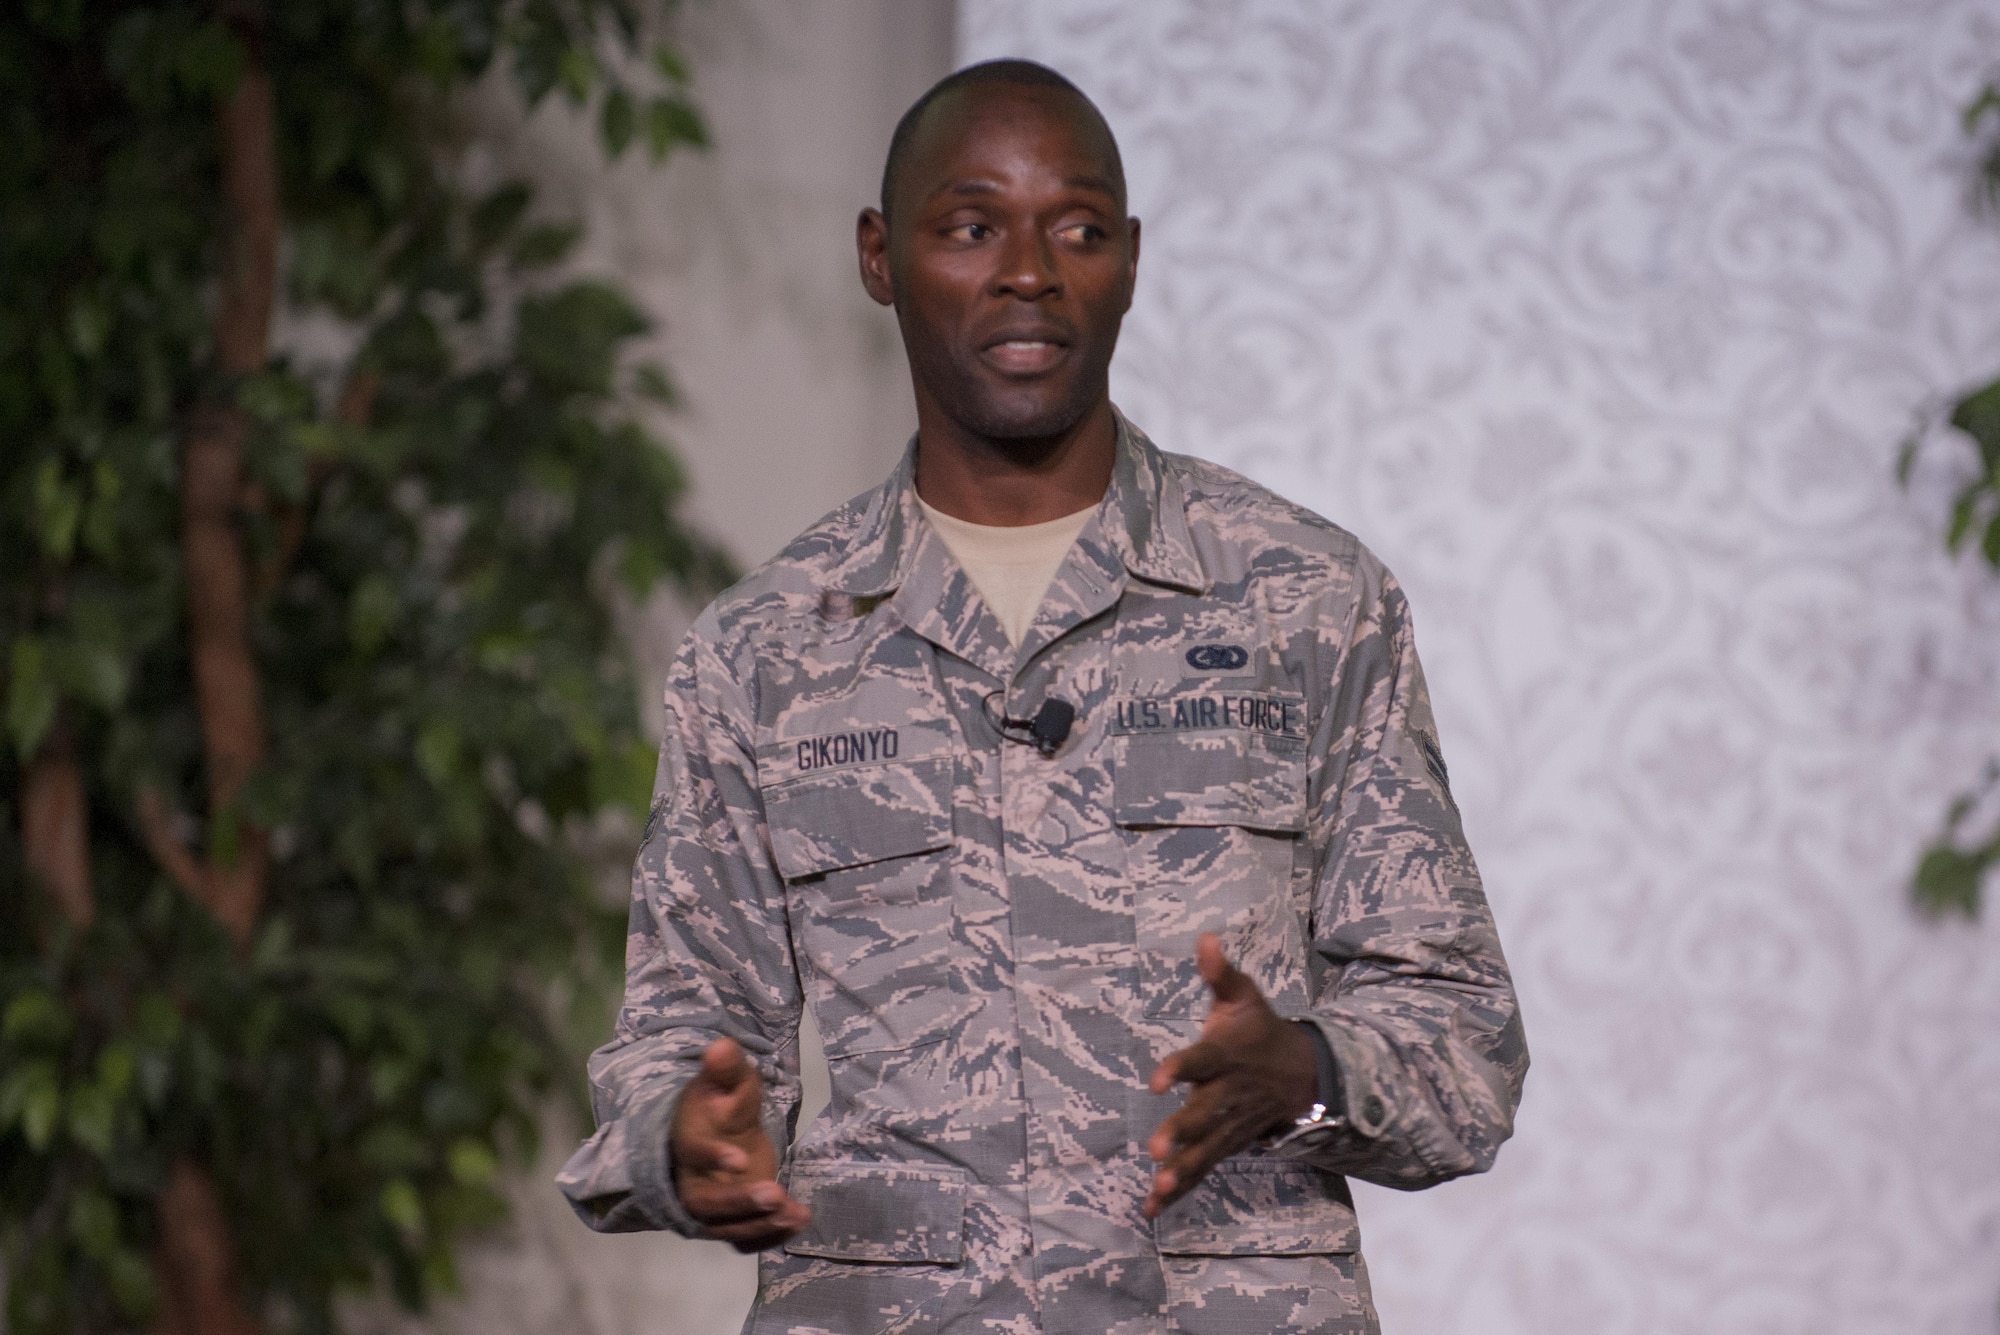 Airman 1st Class Boniface Gikonyo, 635th Supply Chain Operations Squadron, shared his story of his struggles chasing the American Dream during the Storytellers event July 26 at Scott Air Force Base, Ill. Storytellers was hosted by the Scott Air Force Base NCO Council and gave Airman stationed at Scott a chance to tell a personal story about a tough time in their life and what they did to overcome it. (U.S. Air Force photo/Senior Airman Joshua Eikren)